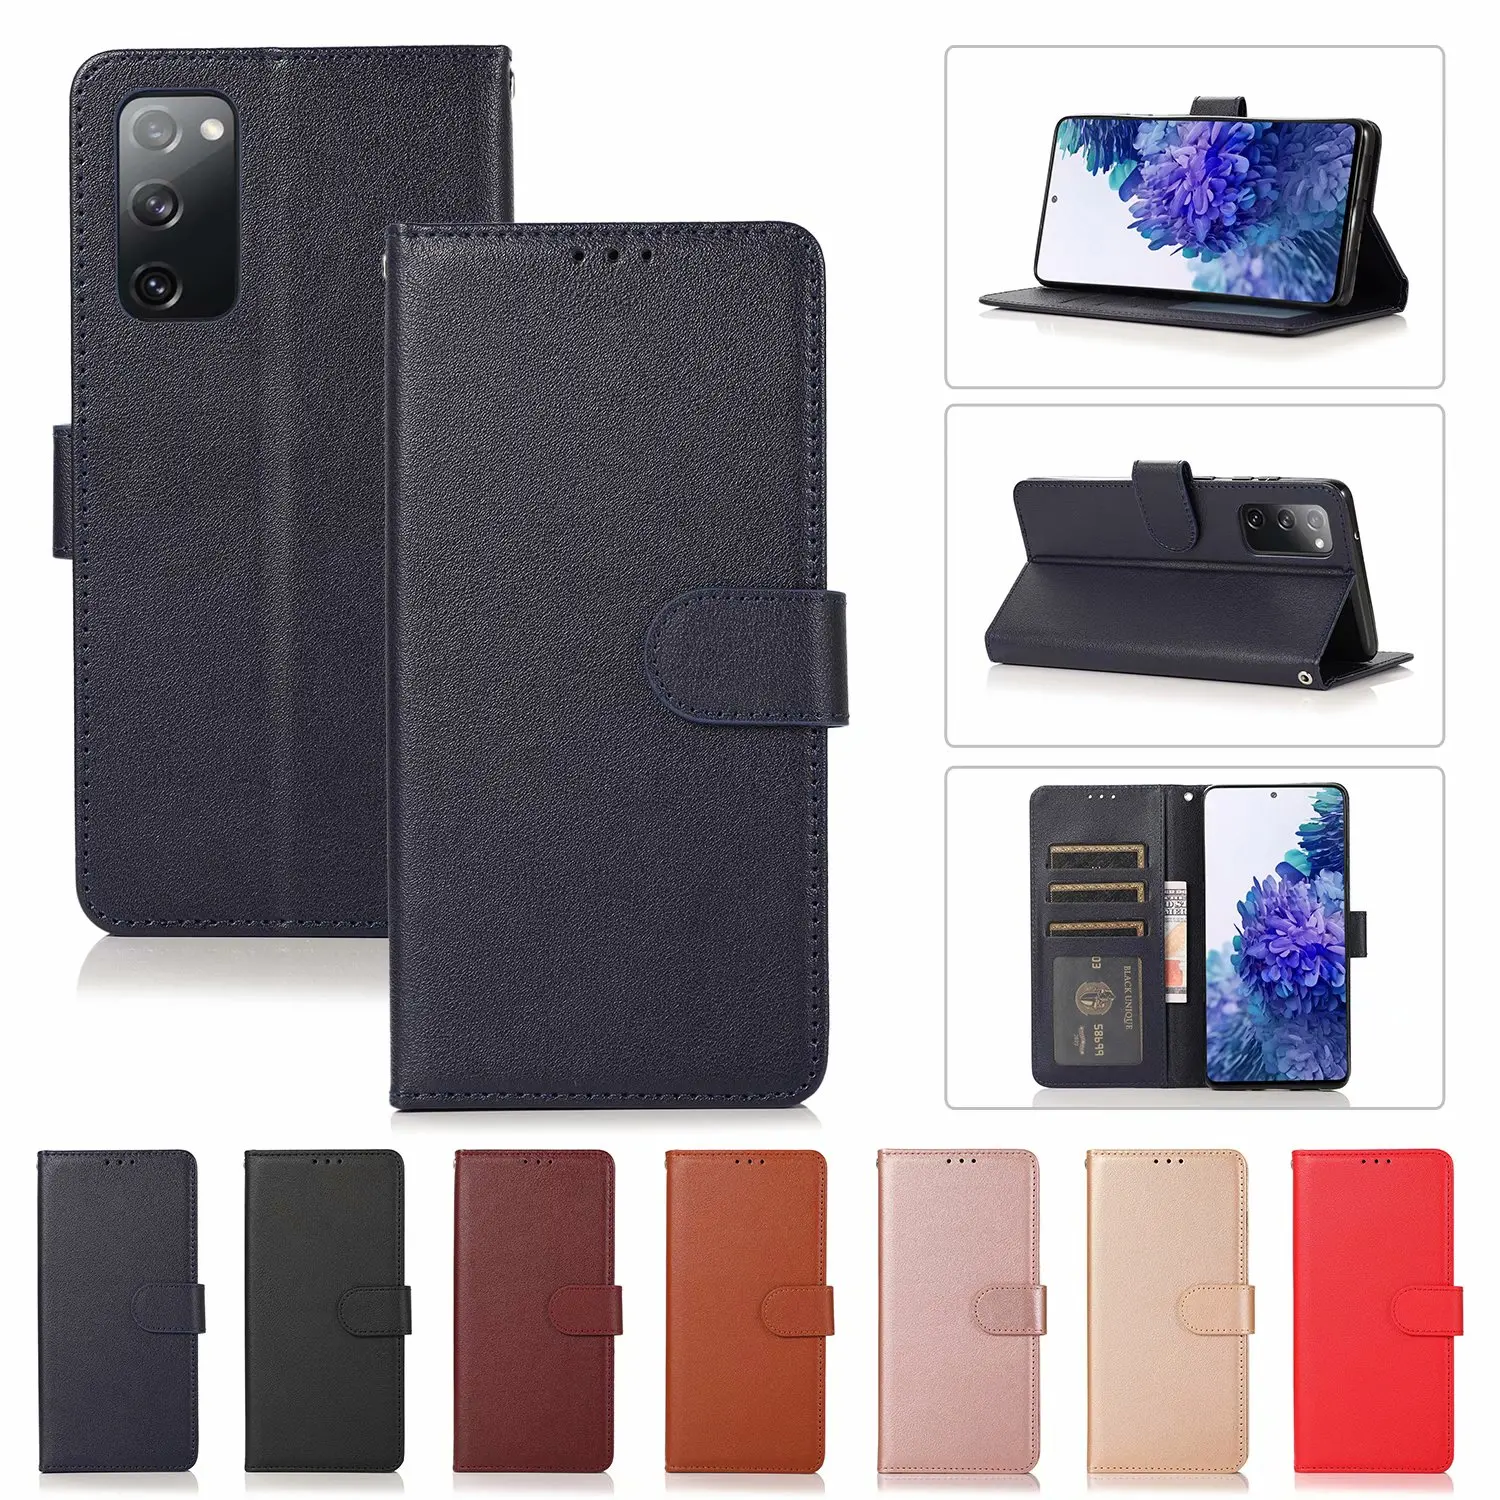 

Leather Case for Samsung Galaxy A01 A10 A12 A21S A31 A20E A40 A41 A42 A50 A51 A70 A71 A02S A7 A6 A8 Flip Wallet Protect Cover